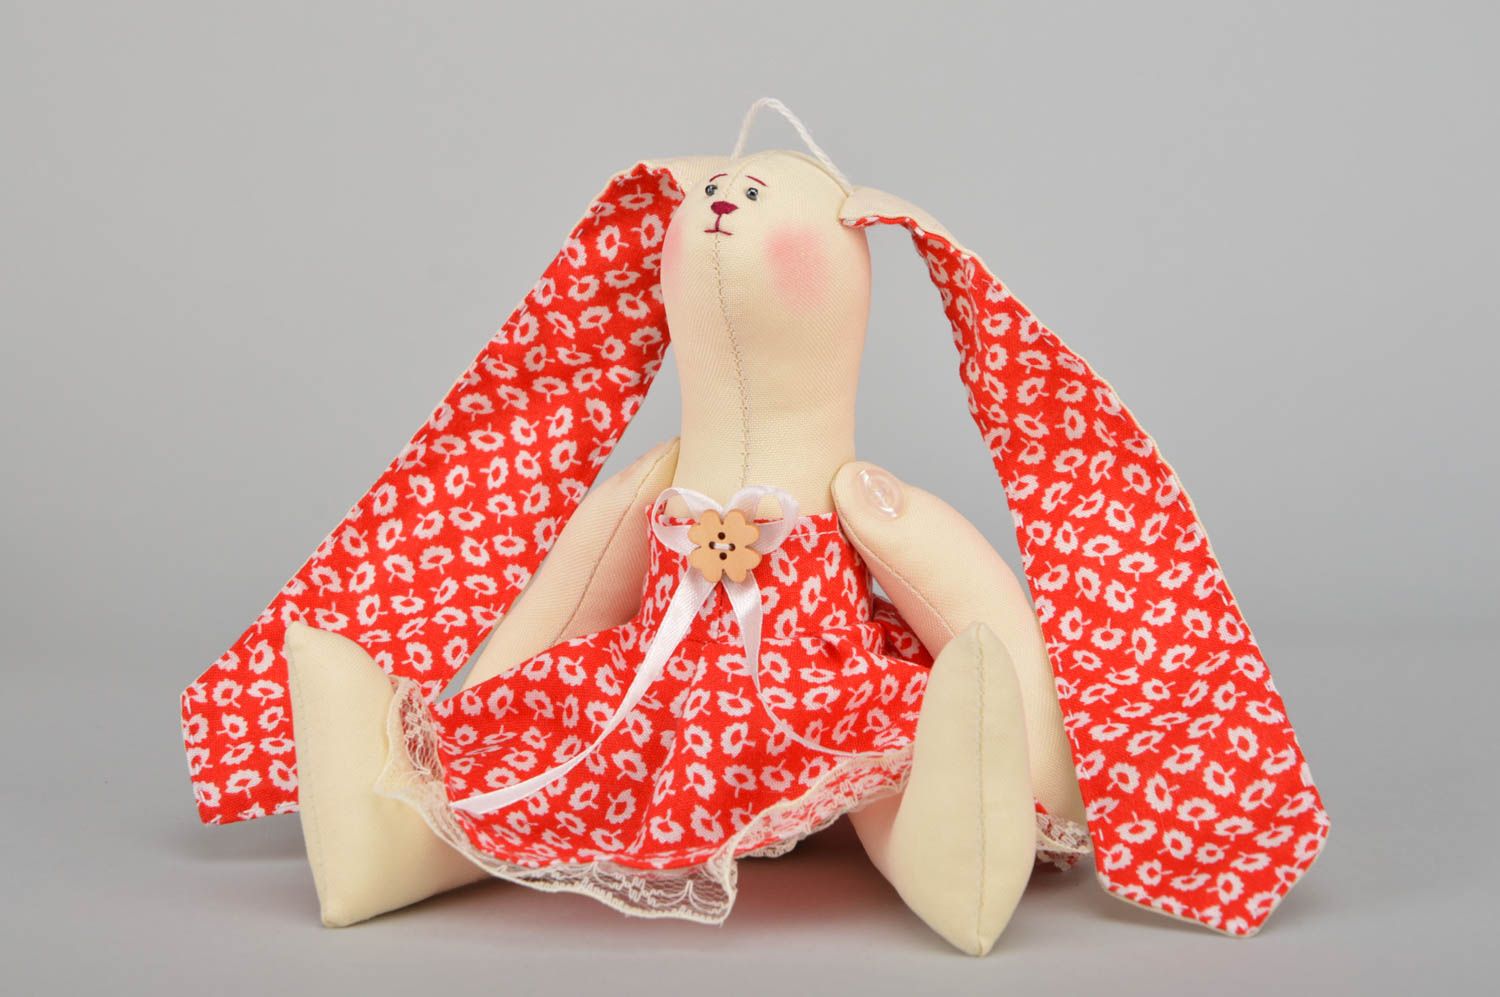 Small homemade fabric soft toy textile toy designs rag doll best toys for kids photo 5